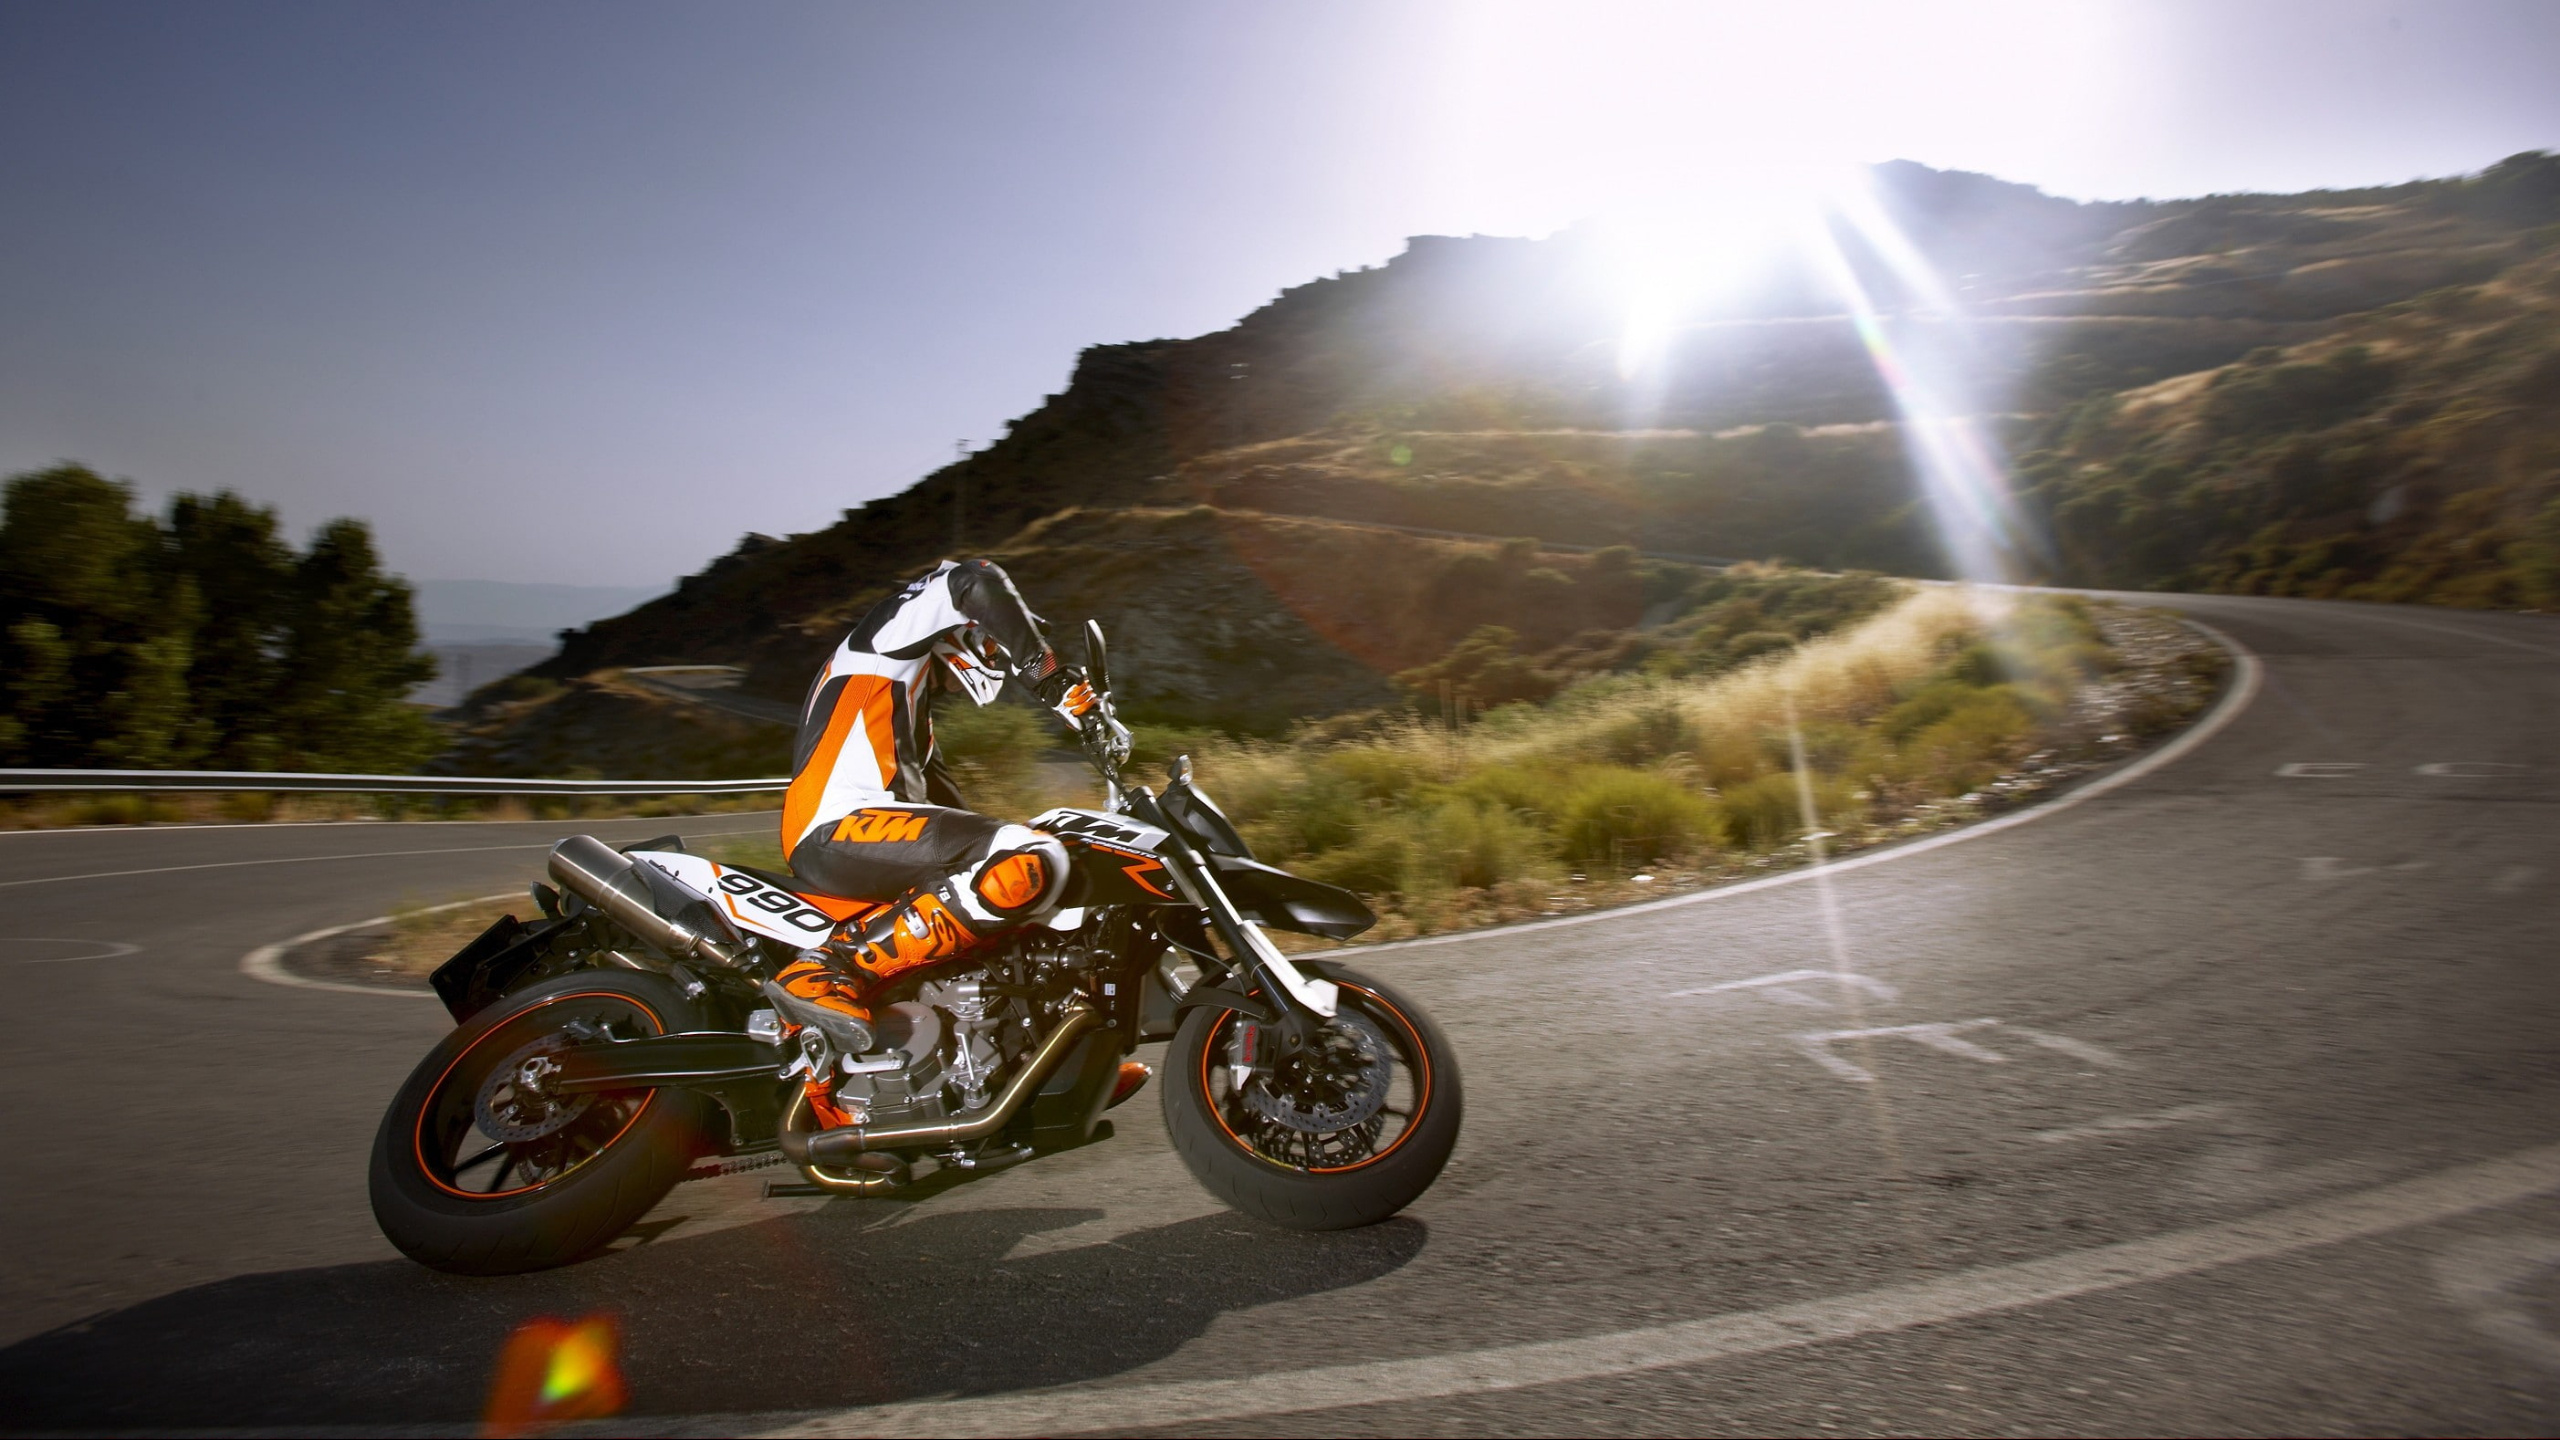 Supermoto: The KTM 990 SM R, A stunning motorcycle, A thrilling ride, A water-cooled V-engine. 2560x1440 HD Background.